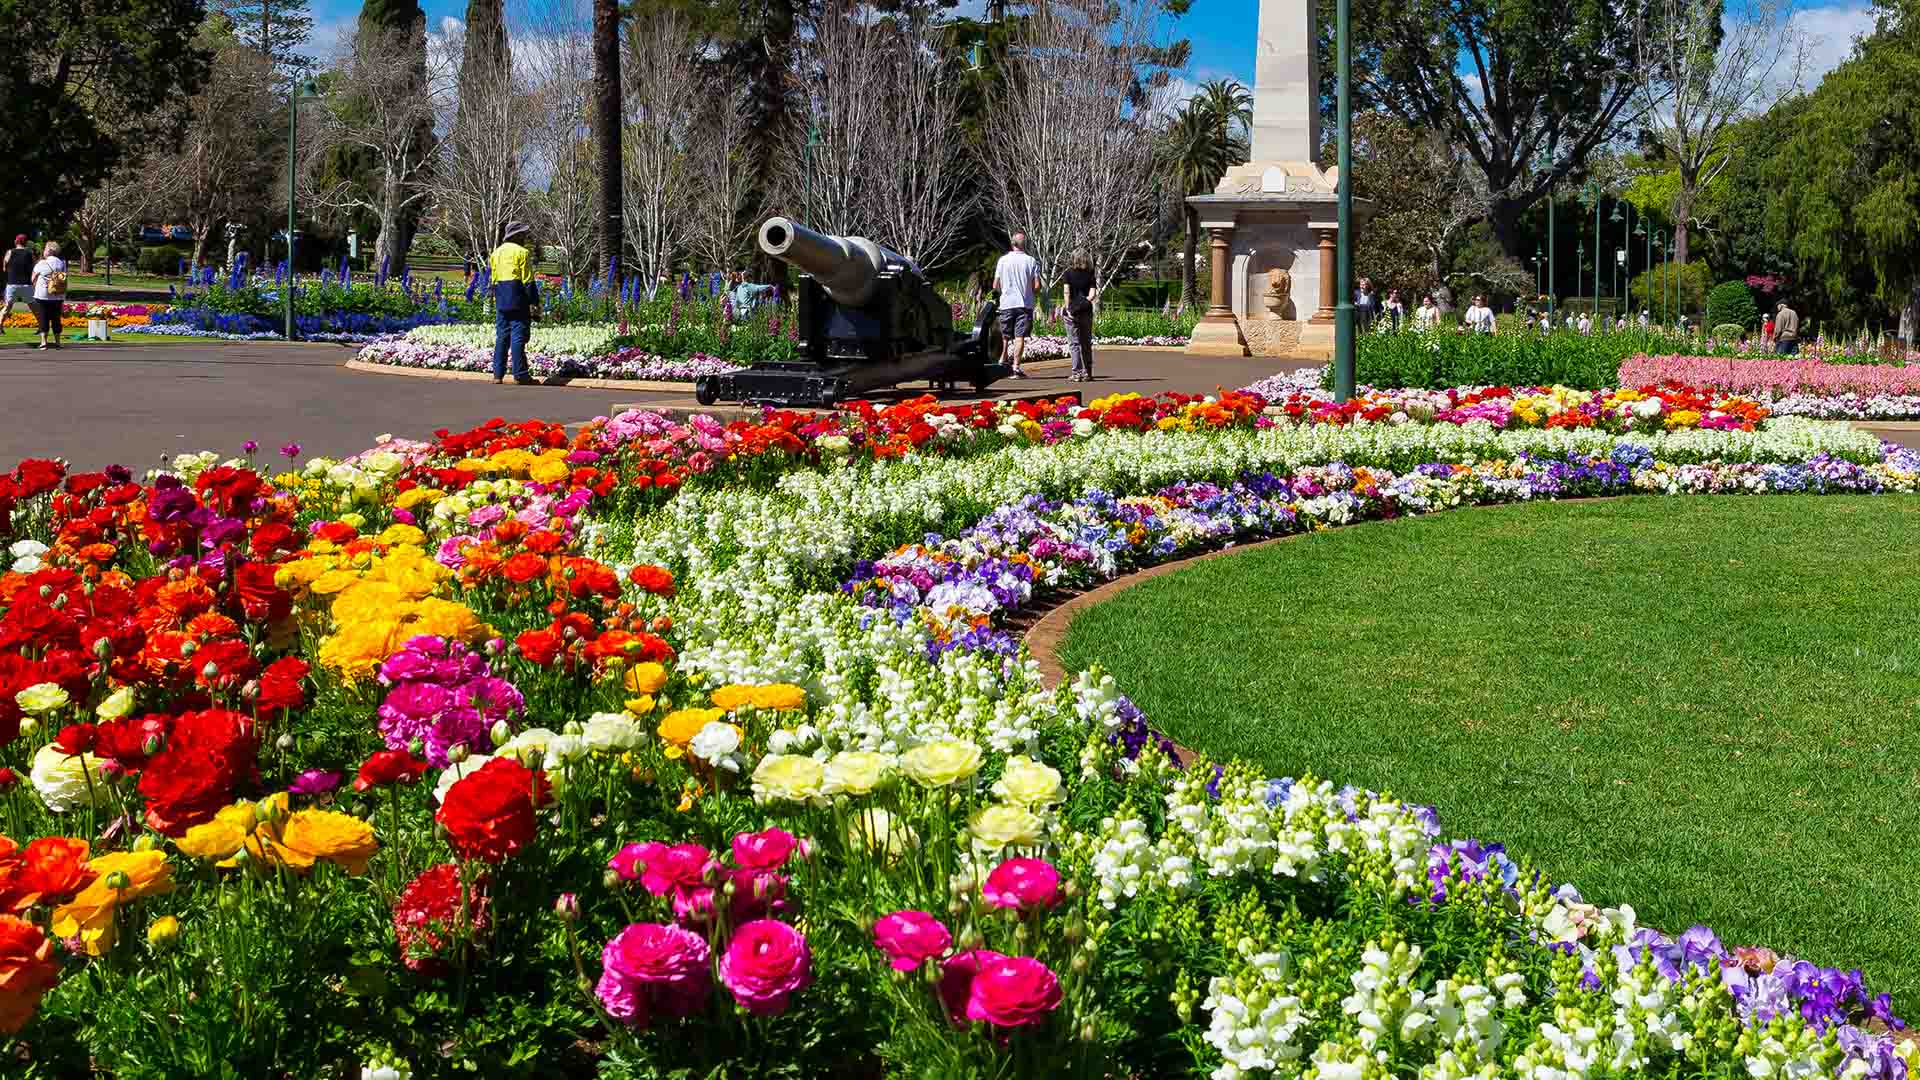 Toowoomba's Carnival of Flowers Has Locked in Its 2023 Dates After a Record-Breaking 2022 Festival